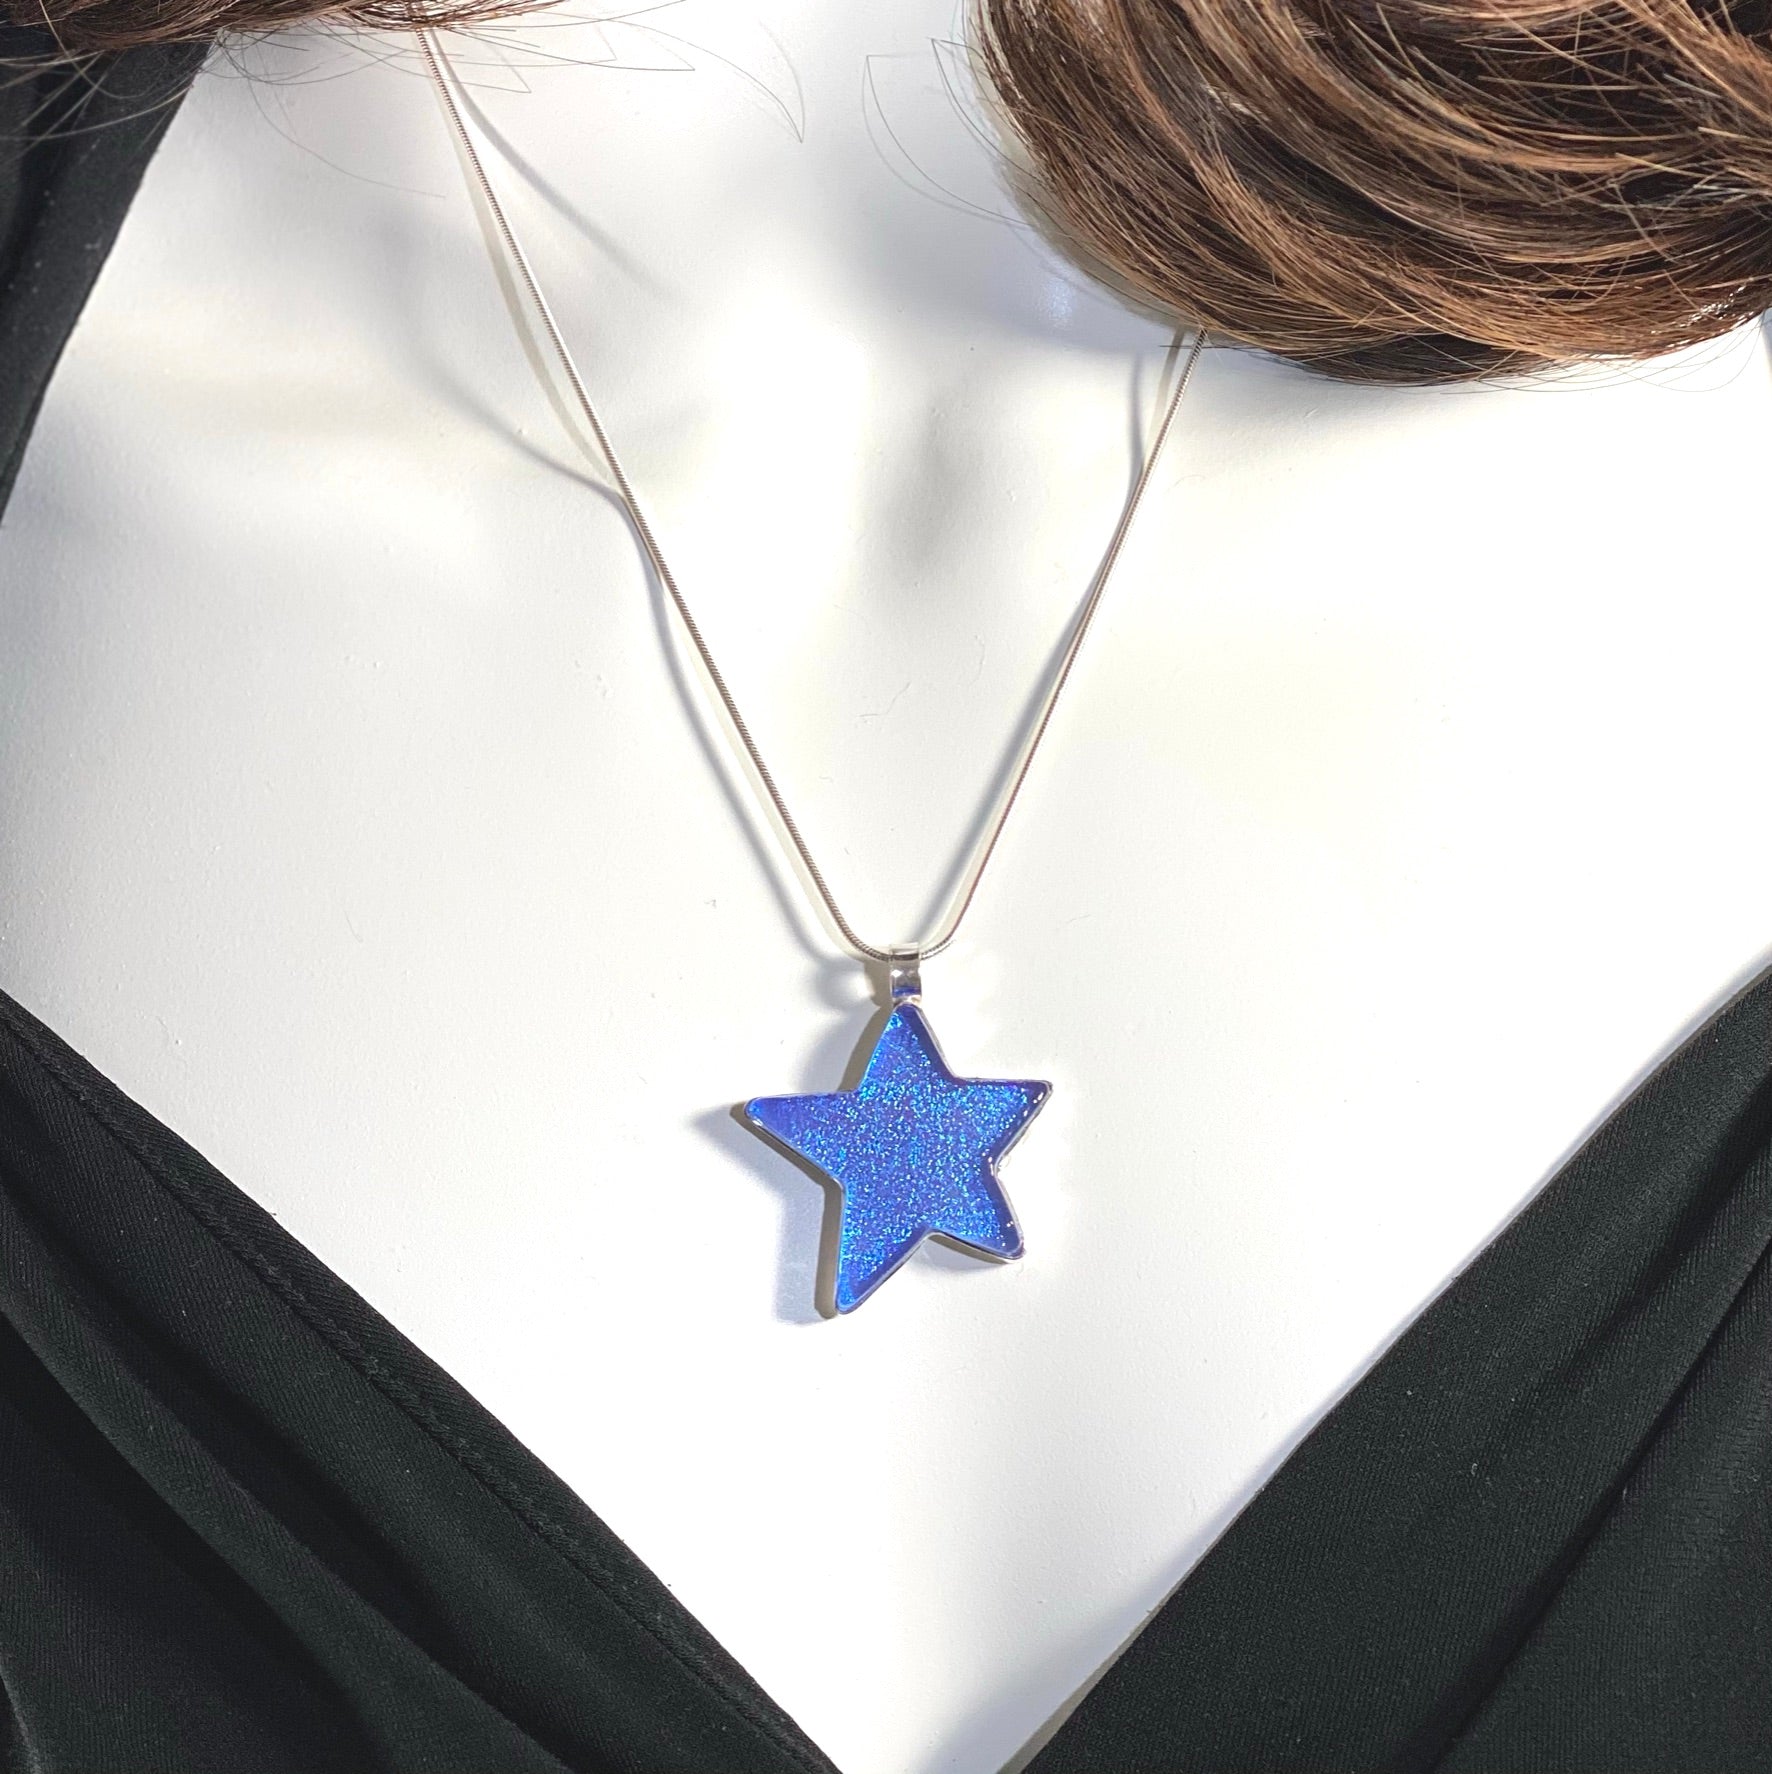 sky blue star pendant, hand cut, necklace, fused glass, glass jewelry, glass and silver jewelry, handmade, handcrafted, American Craft, hand fabricated jewelry, hand fabricated jewellery, Athen, Georgia, colorful jewelry, sparkle, bullseye glass, dichroic glass, art jewelry